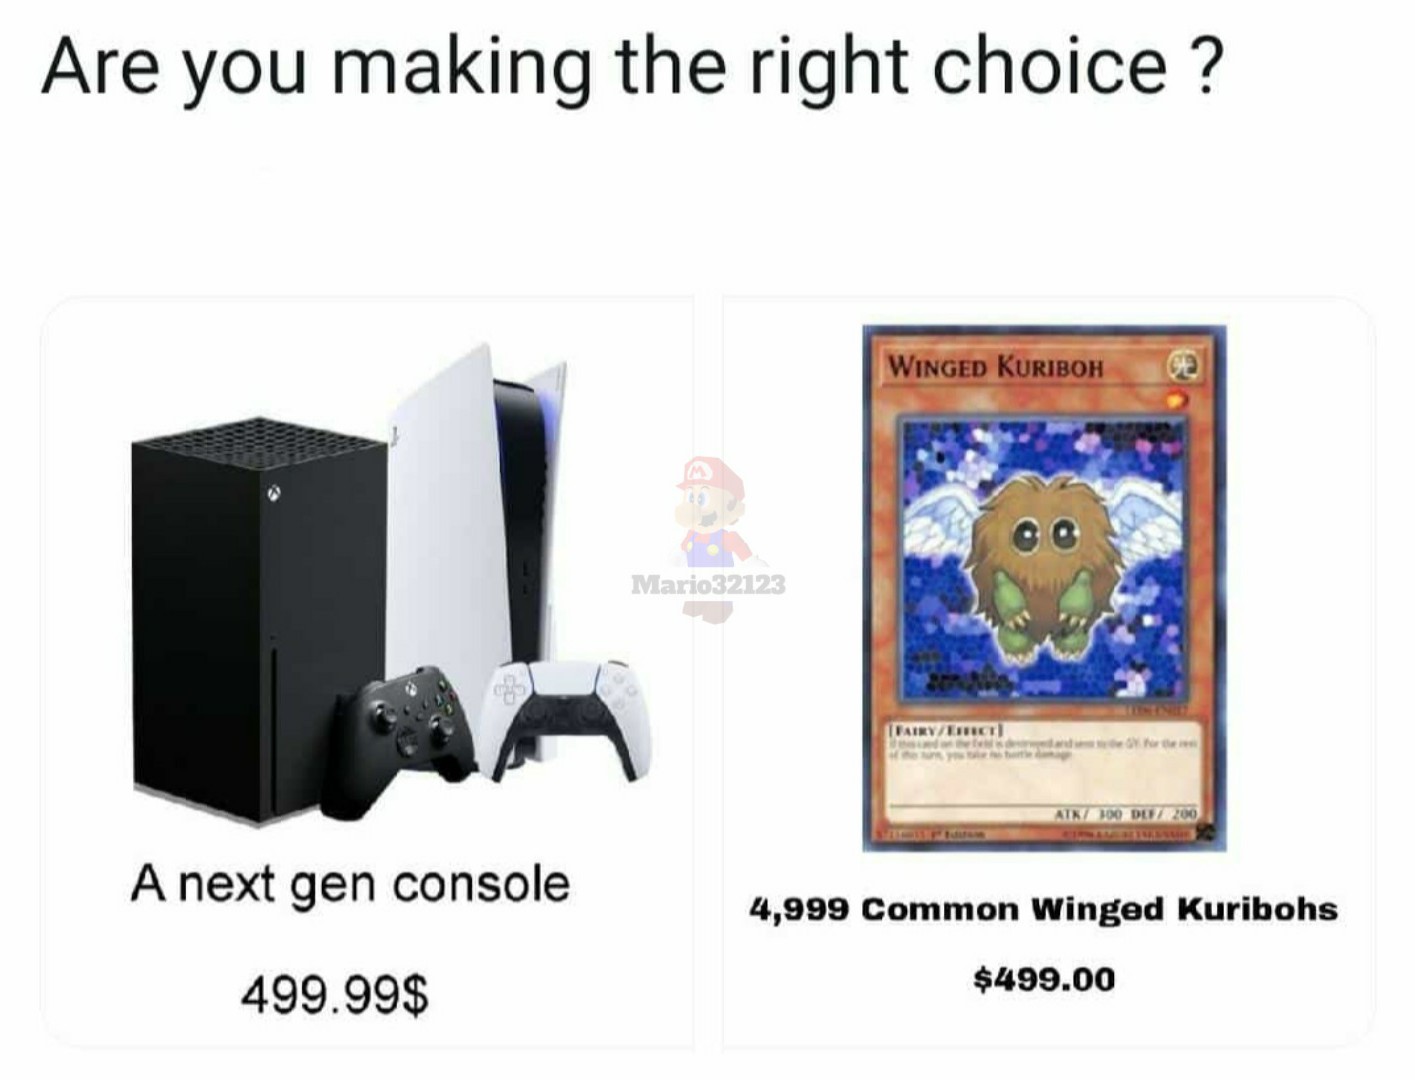 Are you making the right choice? - meme